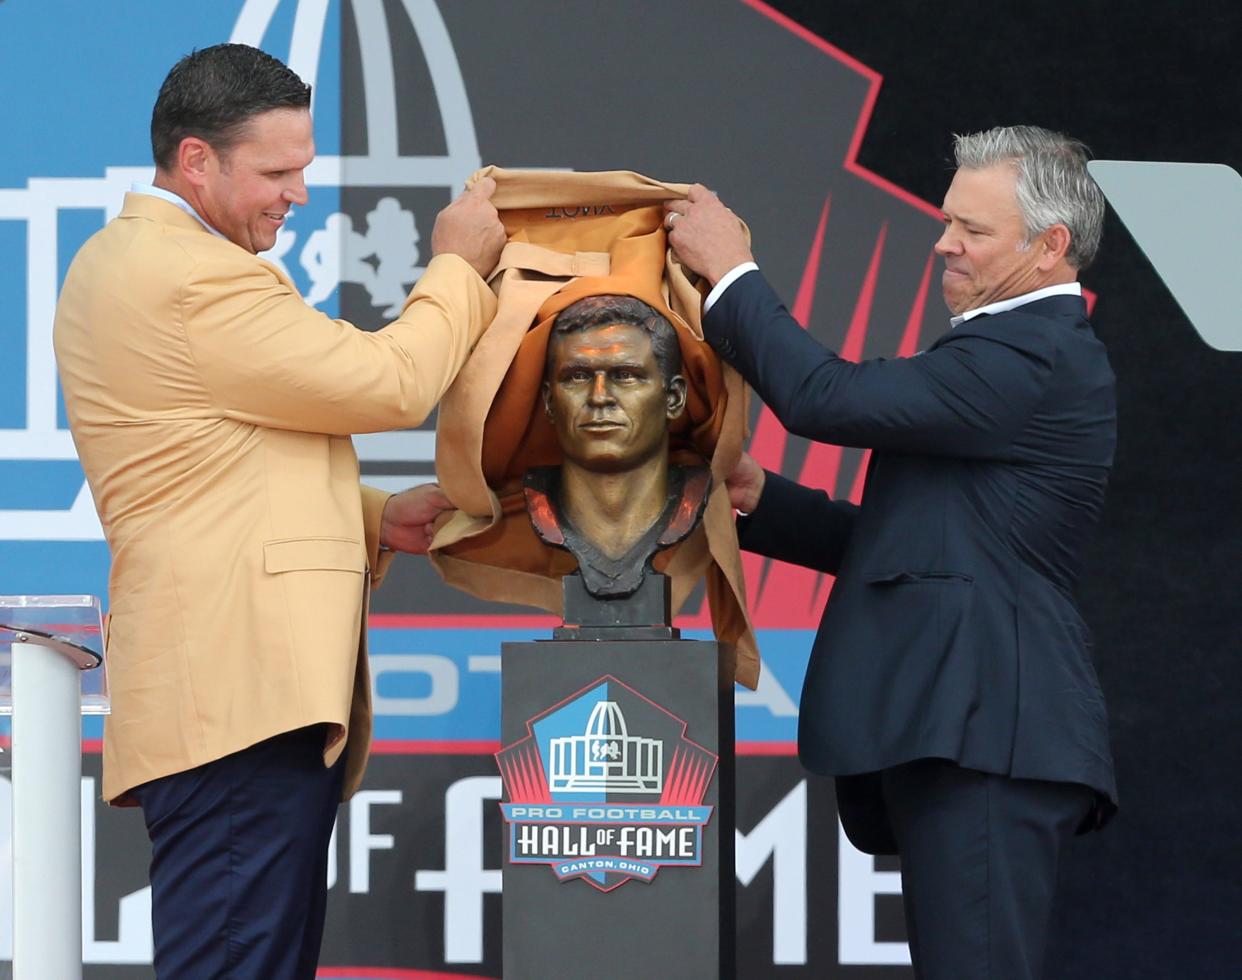 Tony Boselli, left, and his presenter Mark Brunell, right, unveil Boselli's bust during the Pro Football Hall of Fame Enshrinement at Tom Benson Stadium in Canton on Saturday, August 6, 2022.